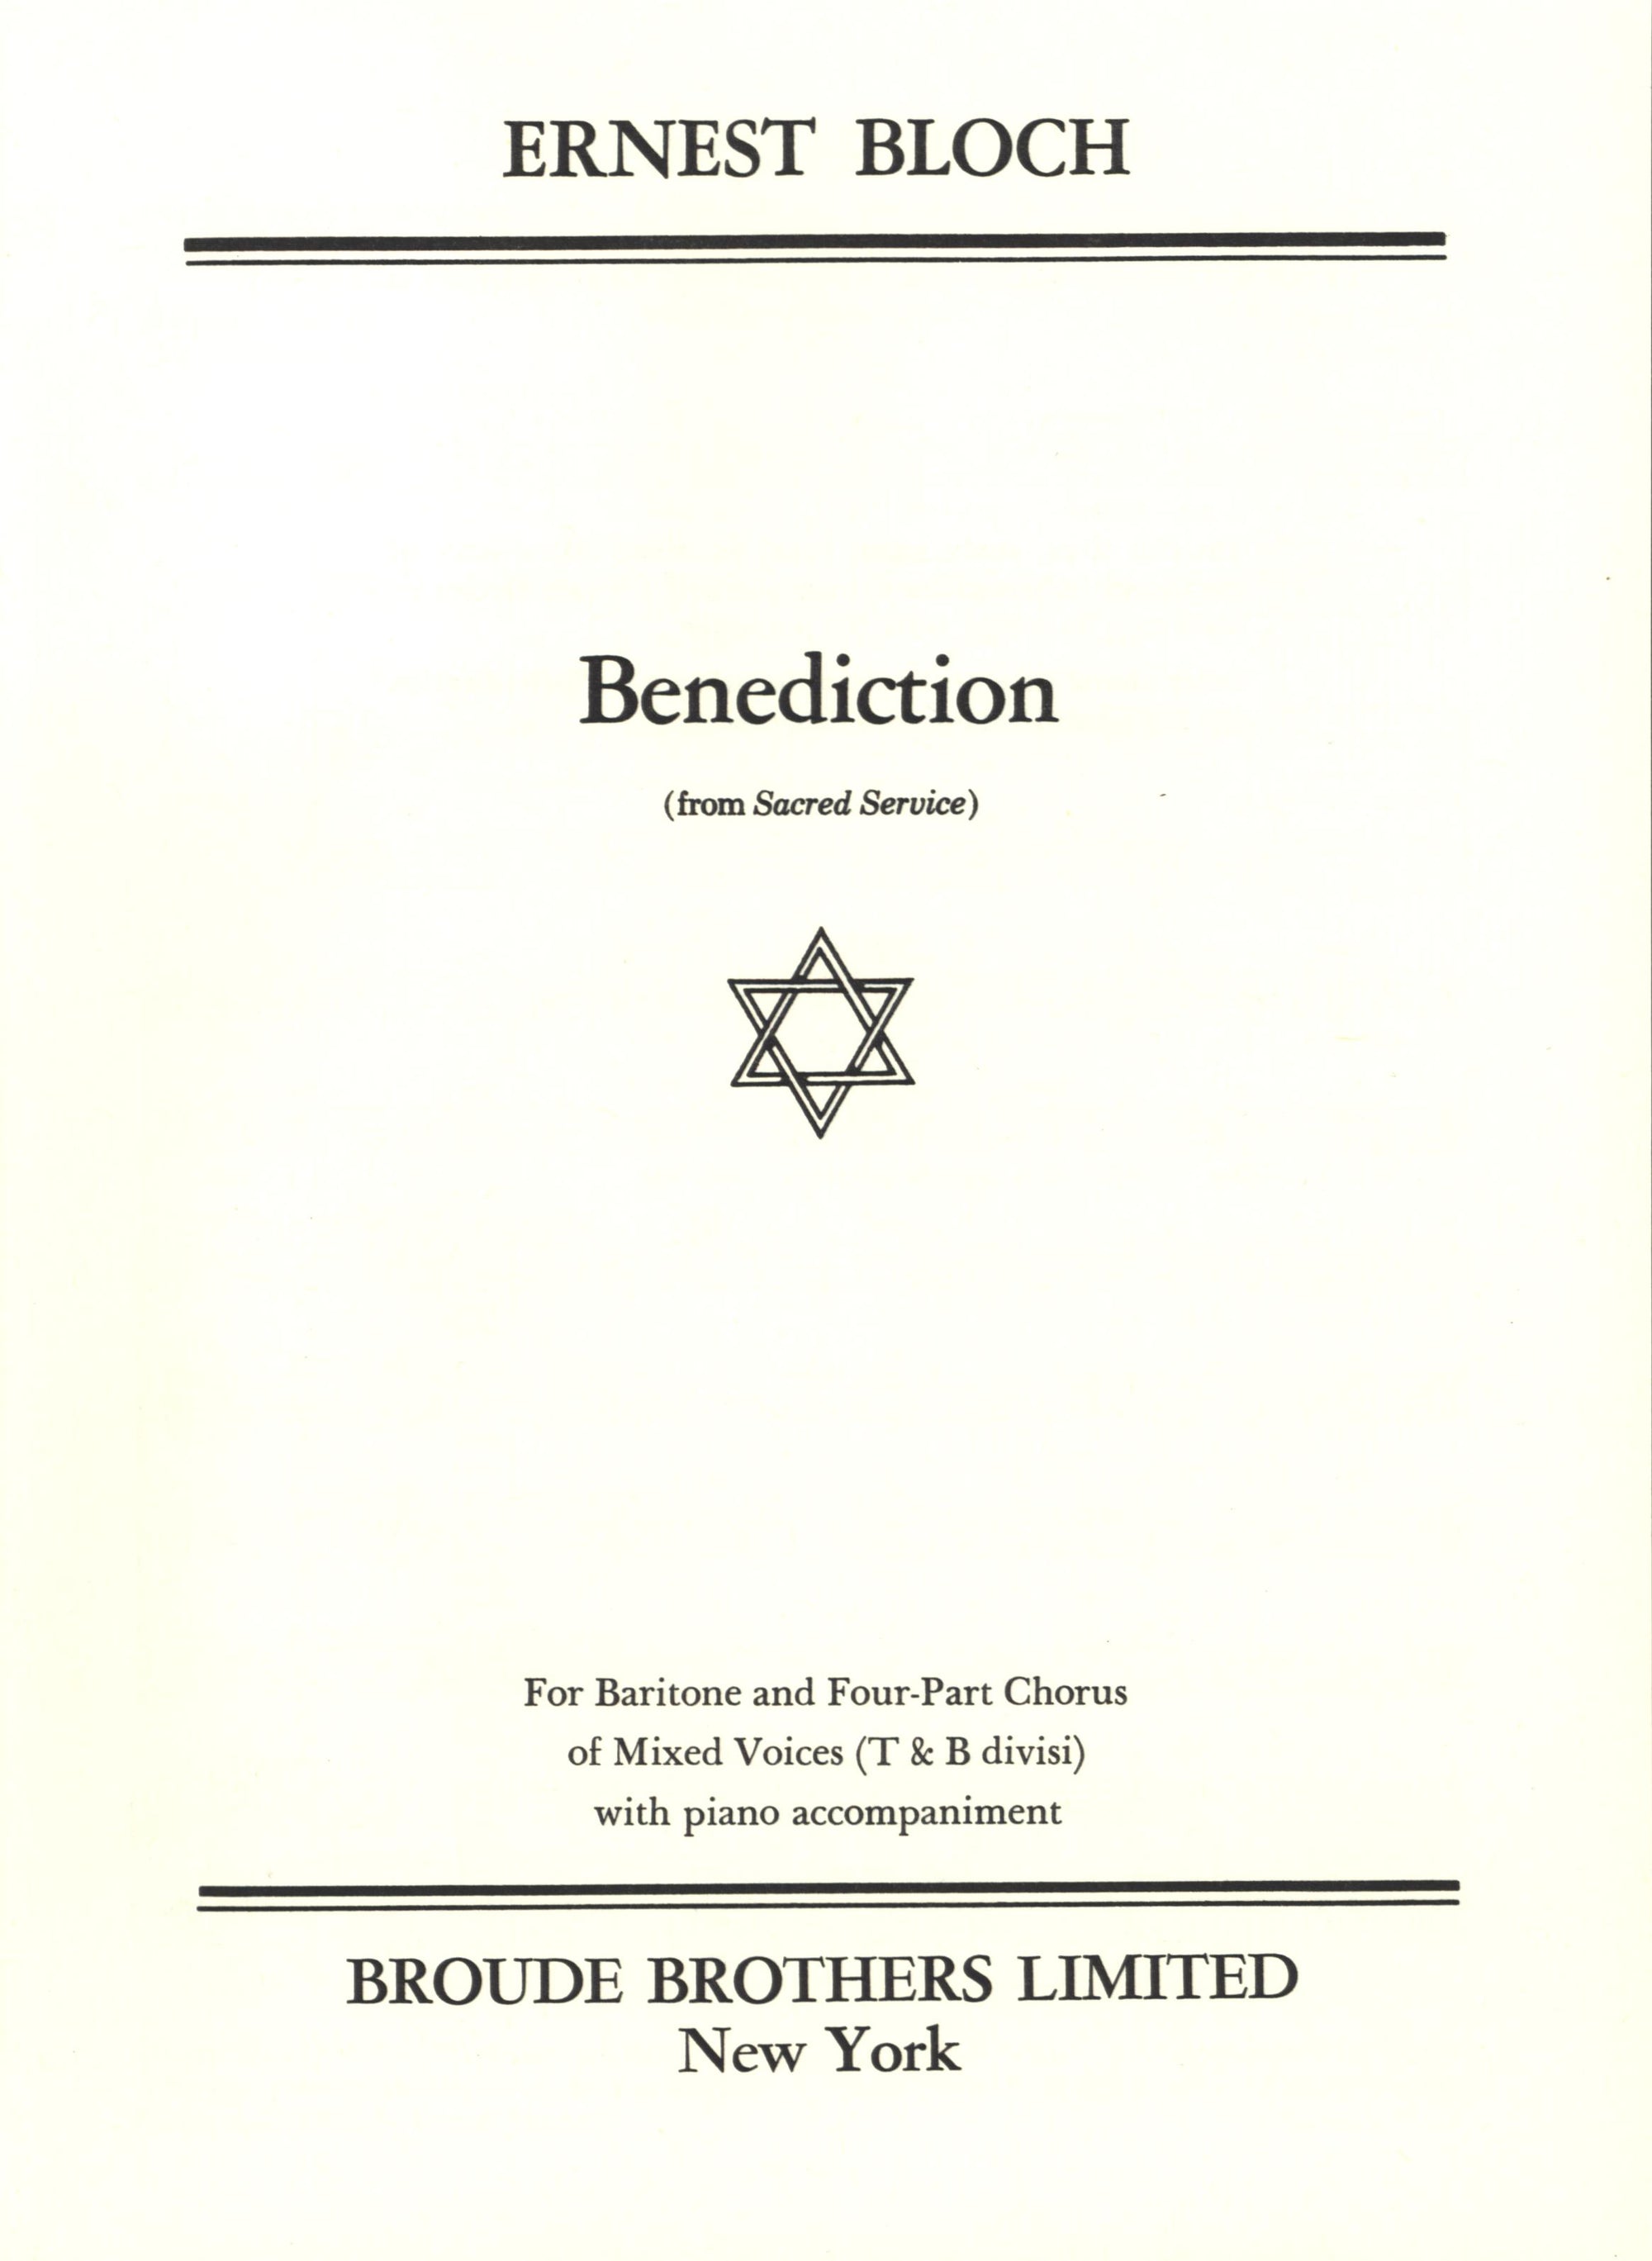 Bloch: Benediction from Sacred Service